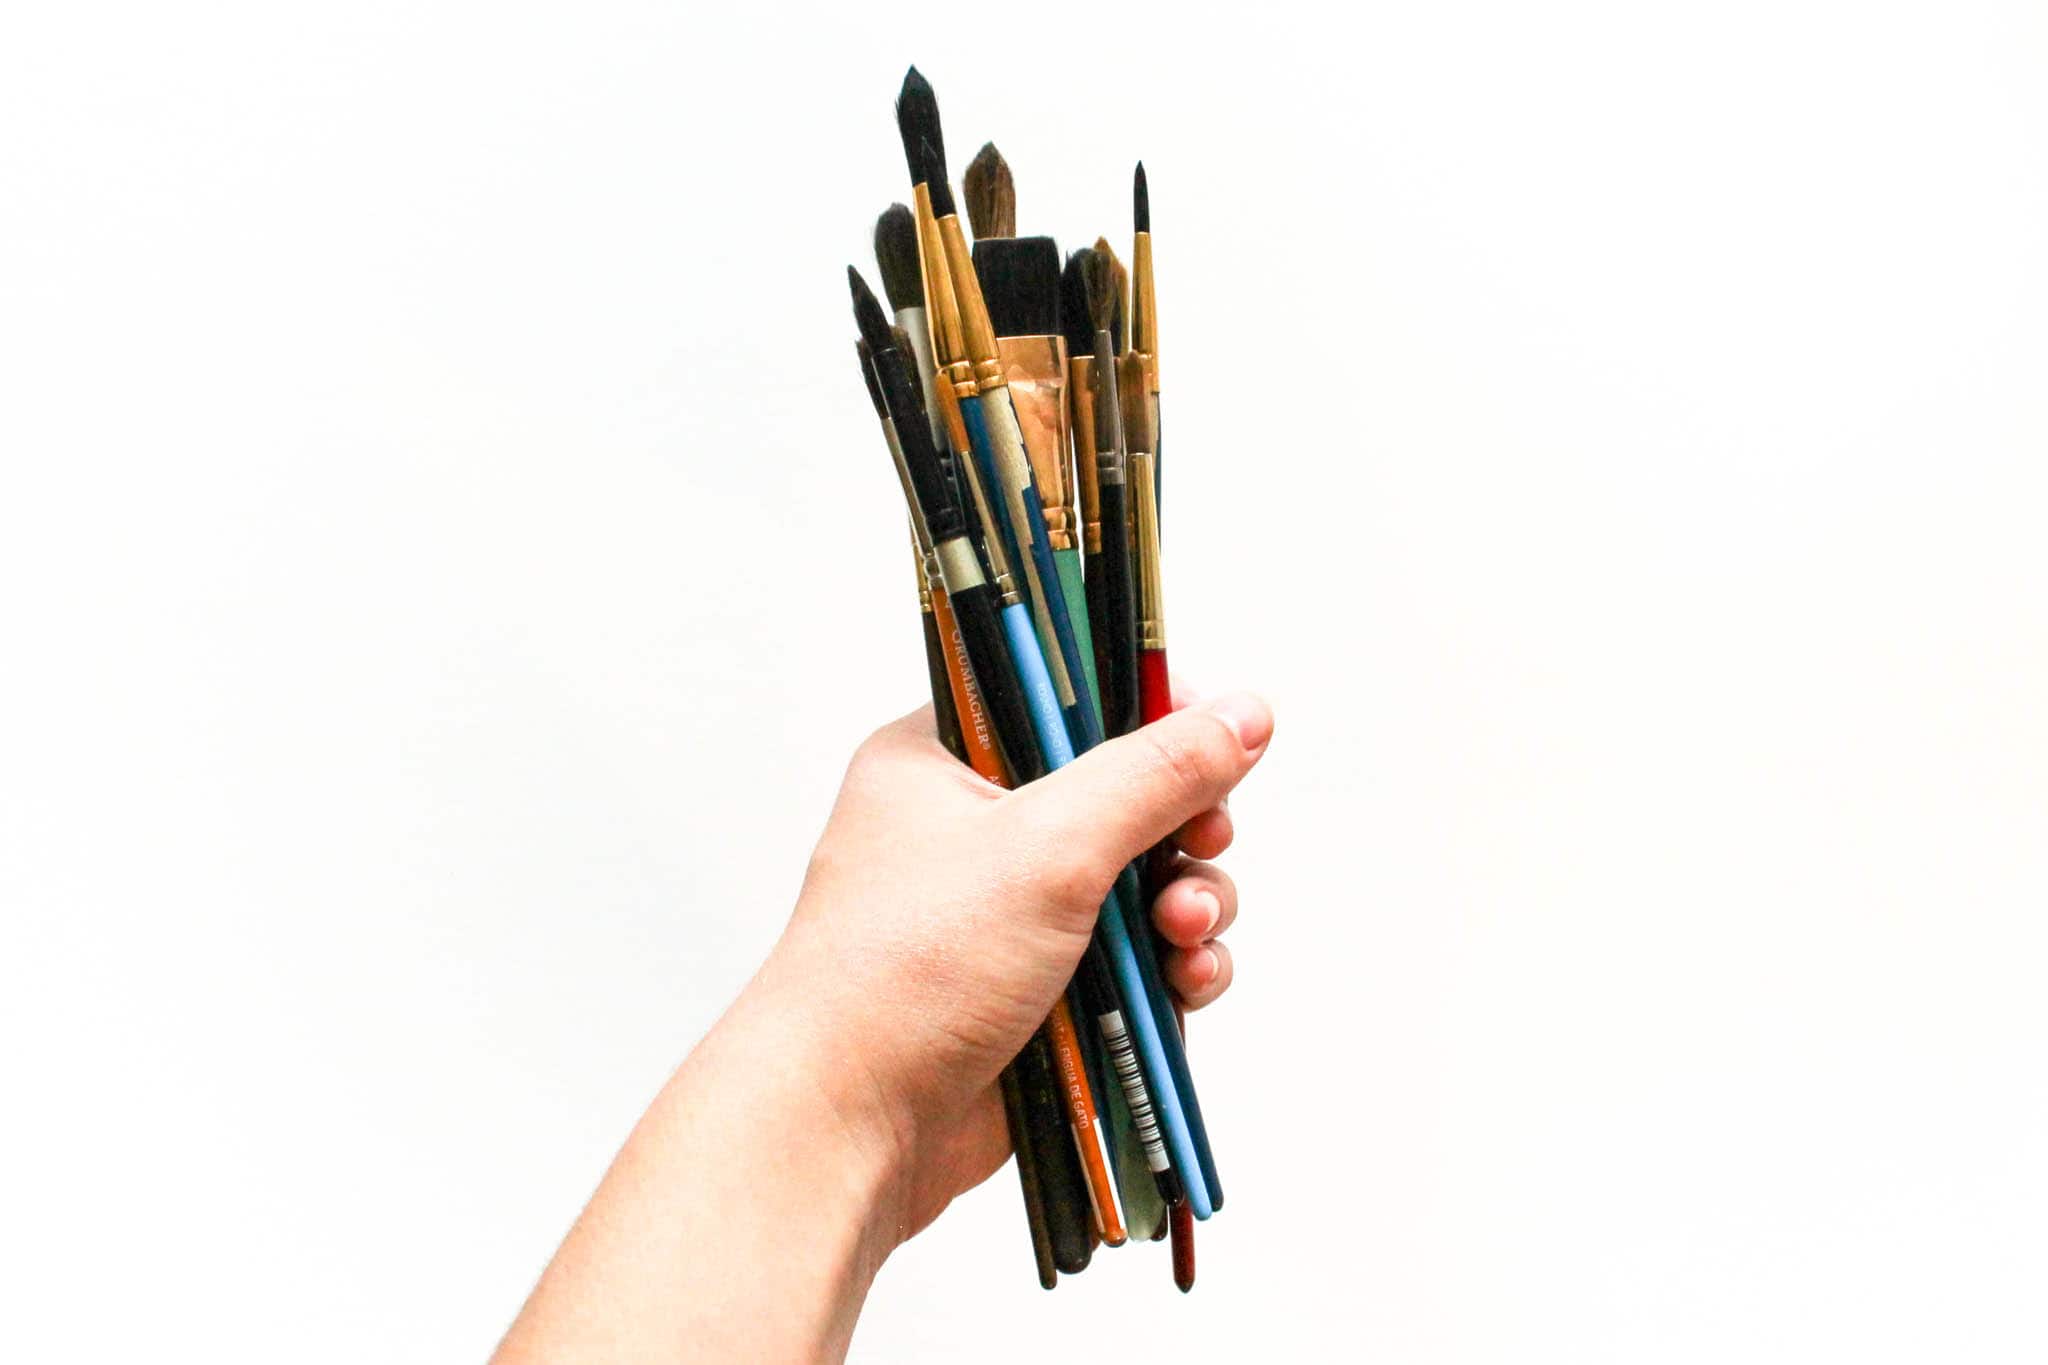 How to Take Care of Watercolor Brushes So They Last